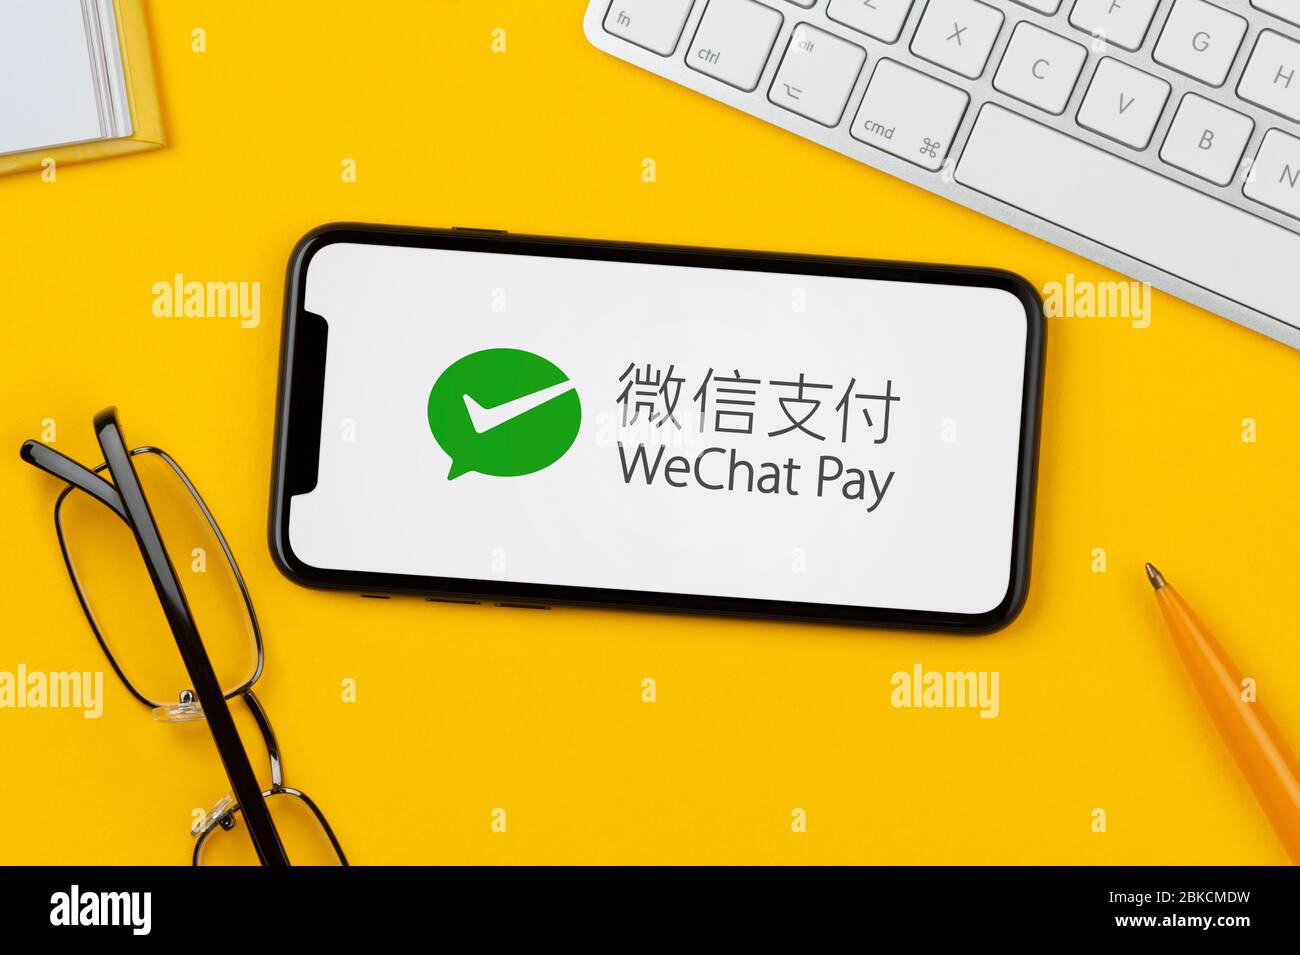 A smartphone showing the WeChat Pay logo rests on a yellow background along with a keyboard, glasses, pen and book (Editorial use only). Stock Photo